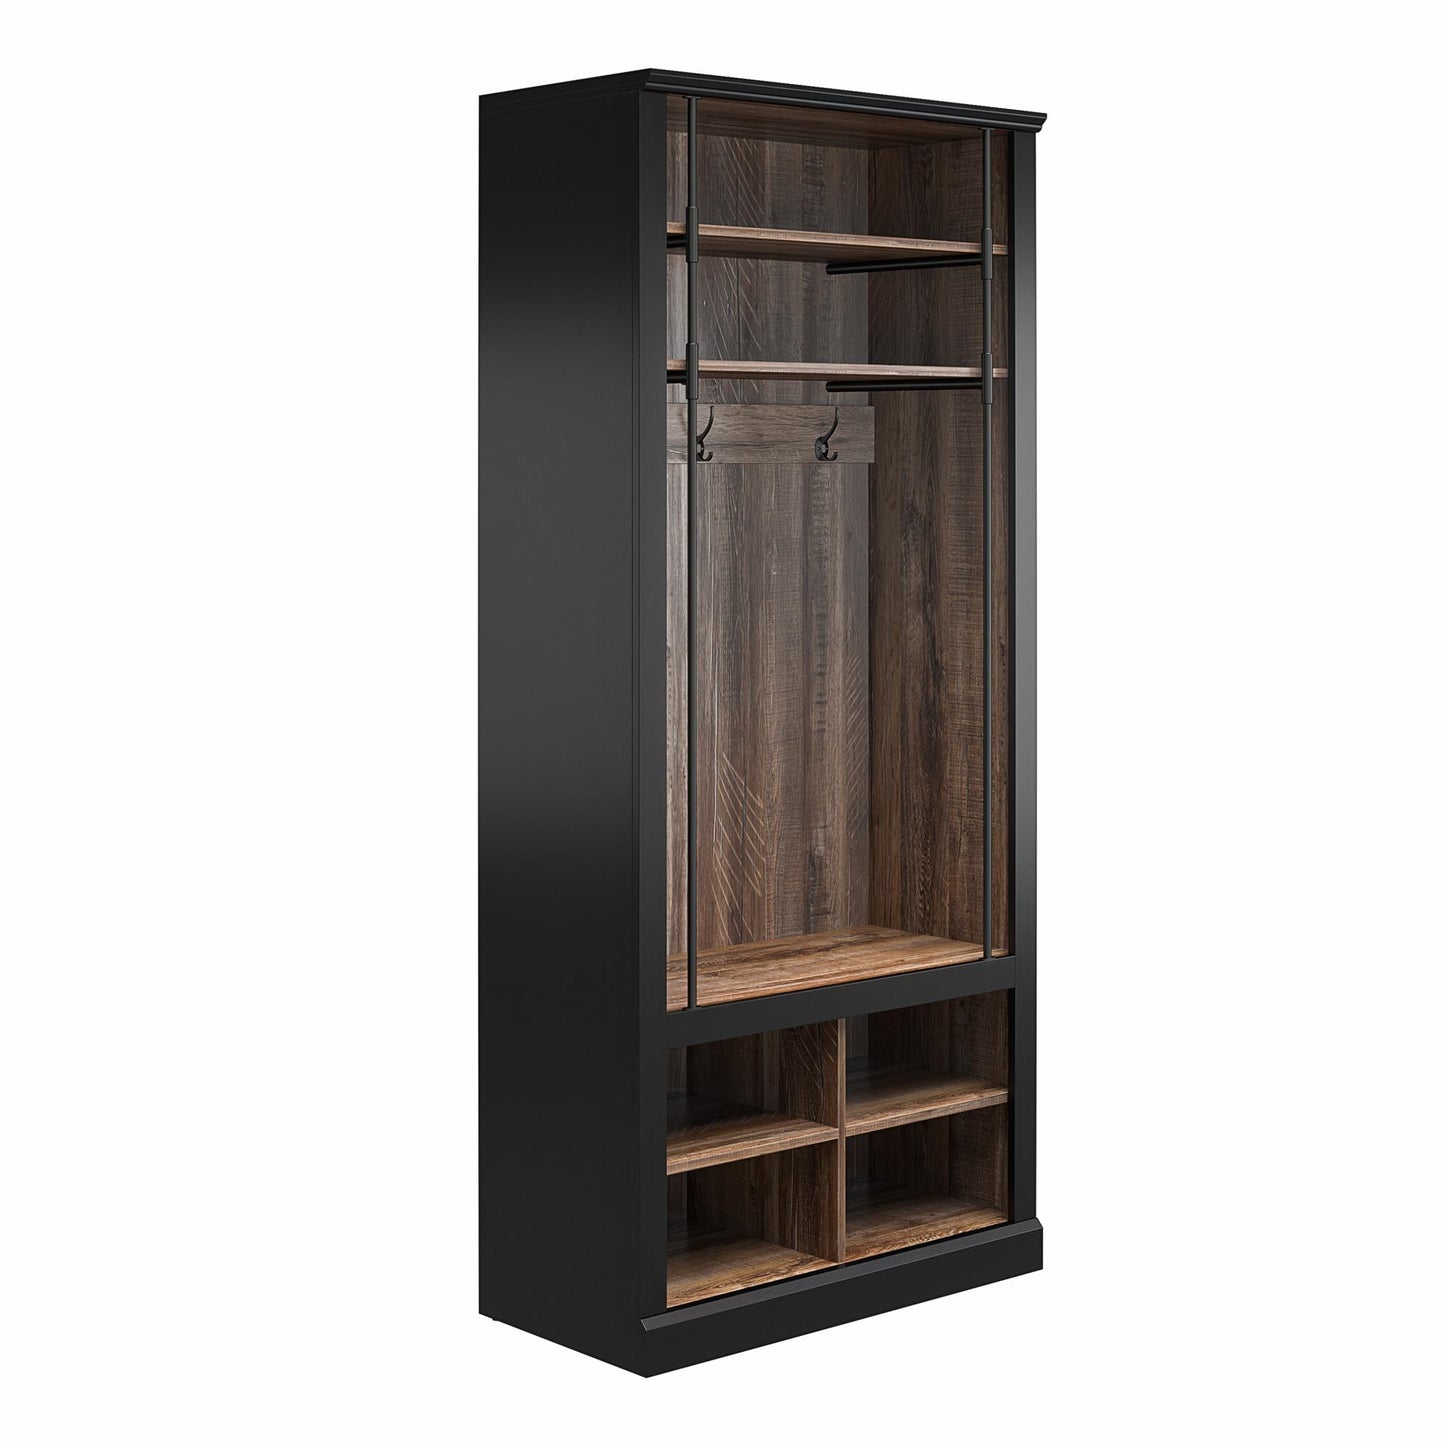 Hoffmann Entryway Hall Tree with Bench and Storage Cubbies - Black